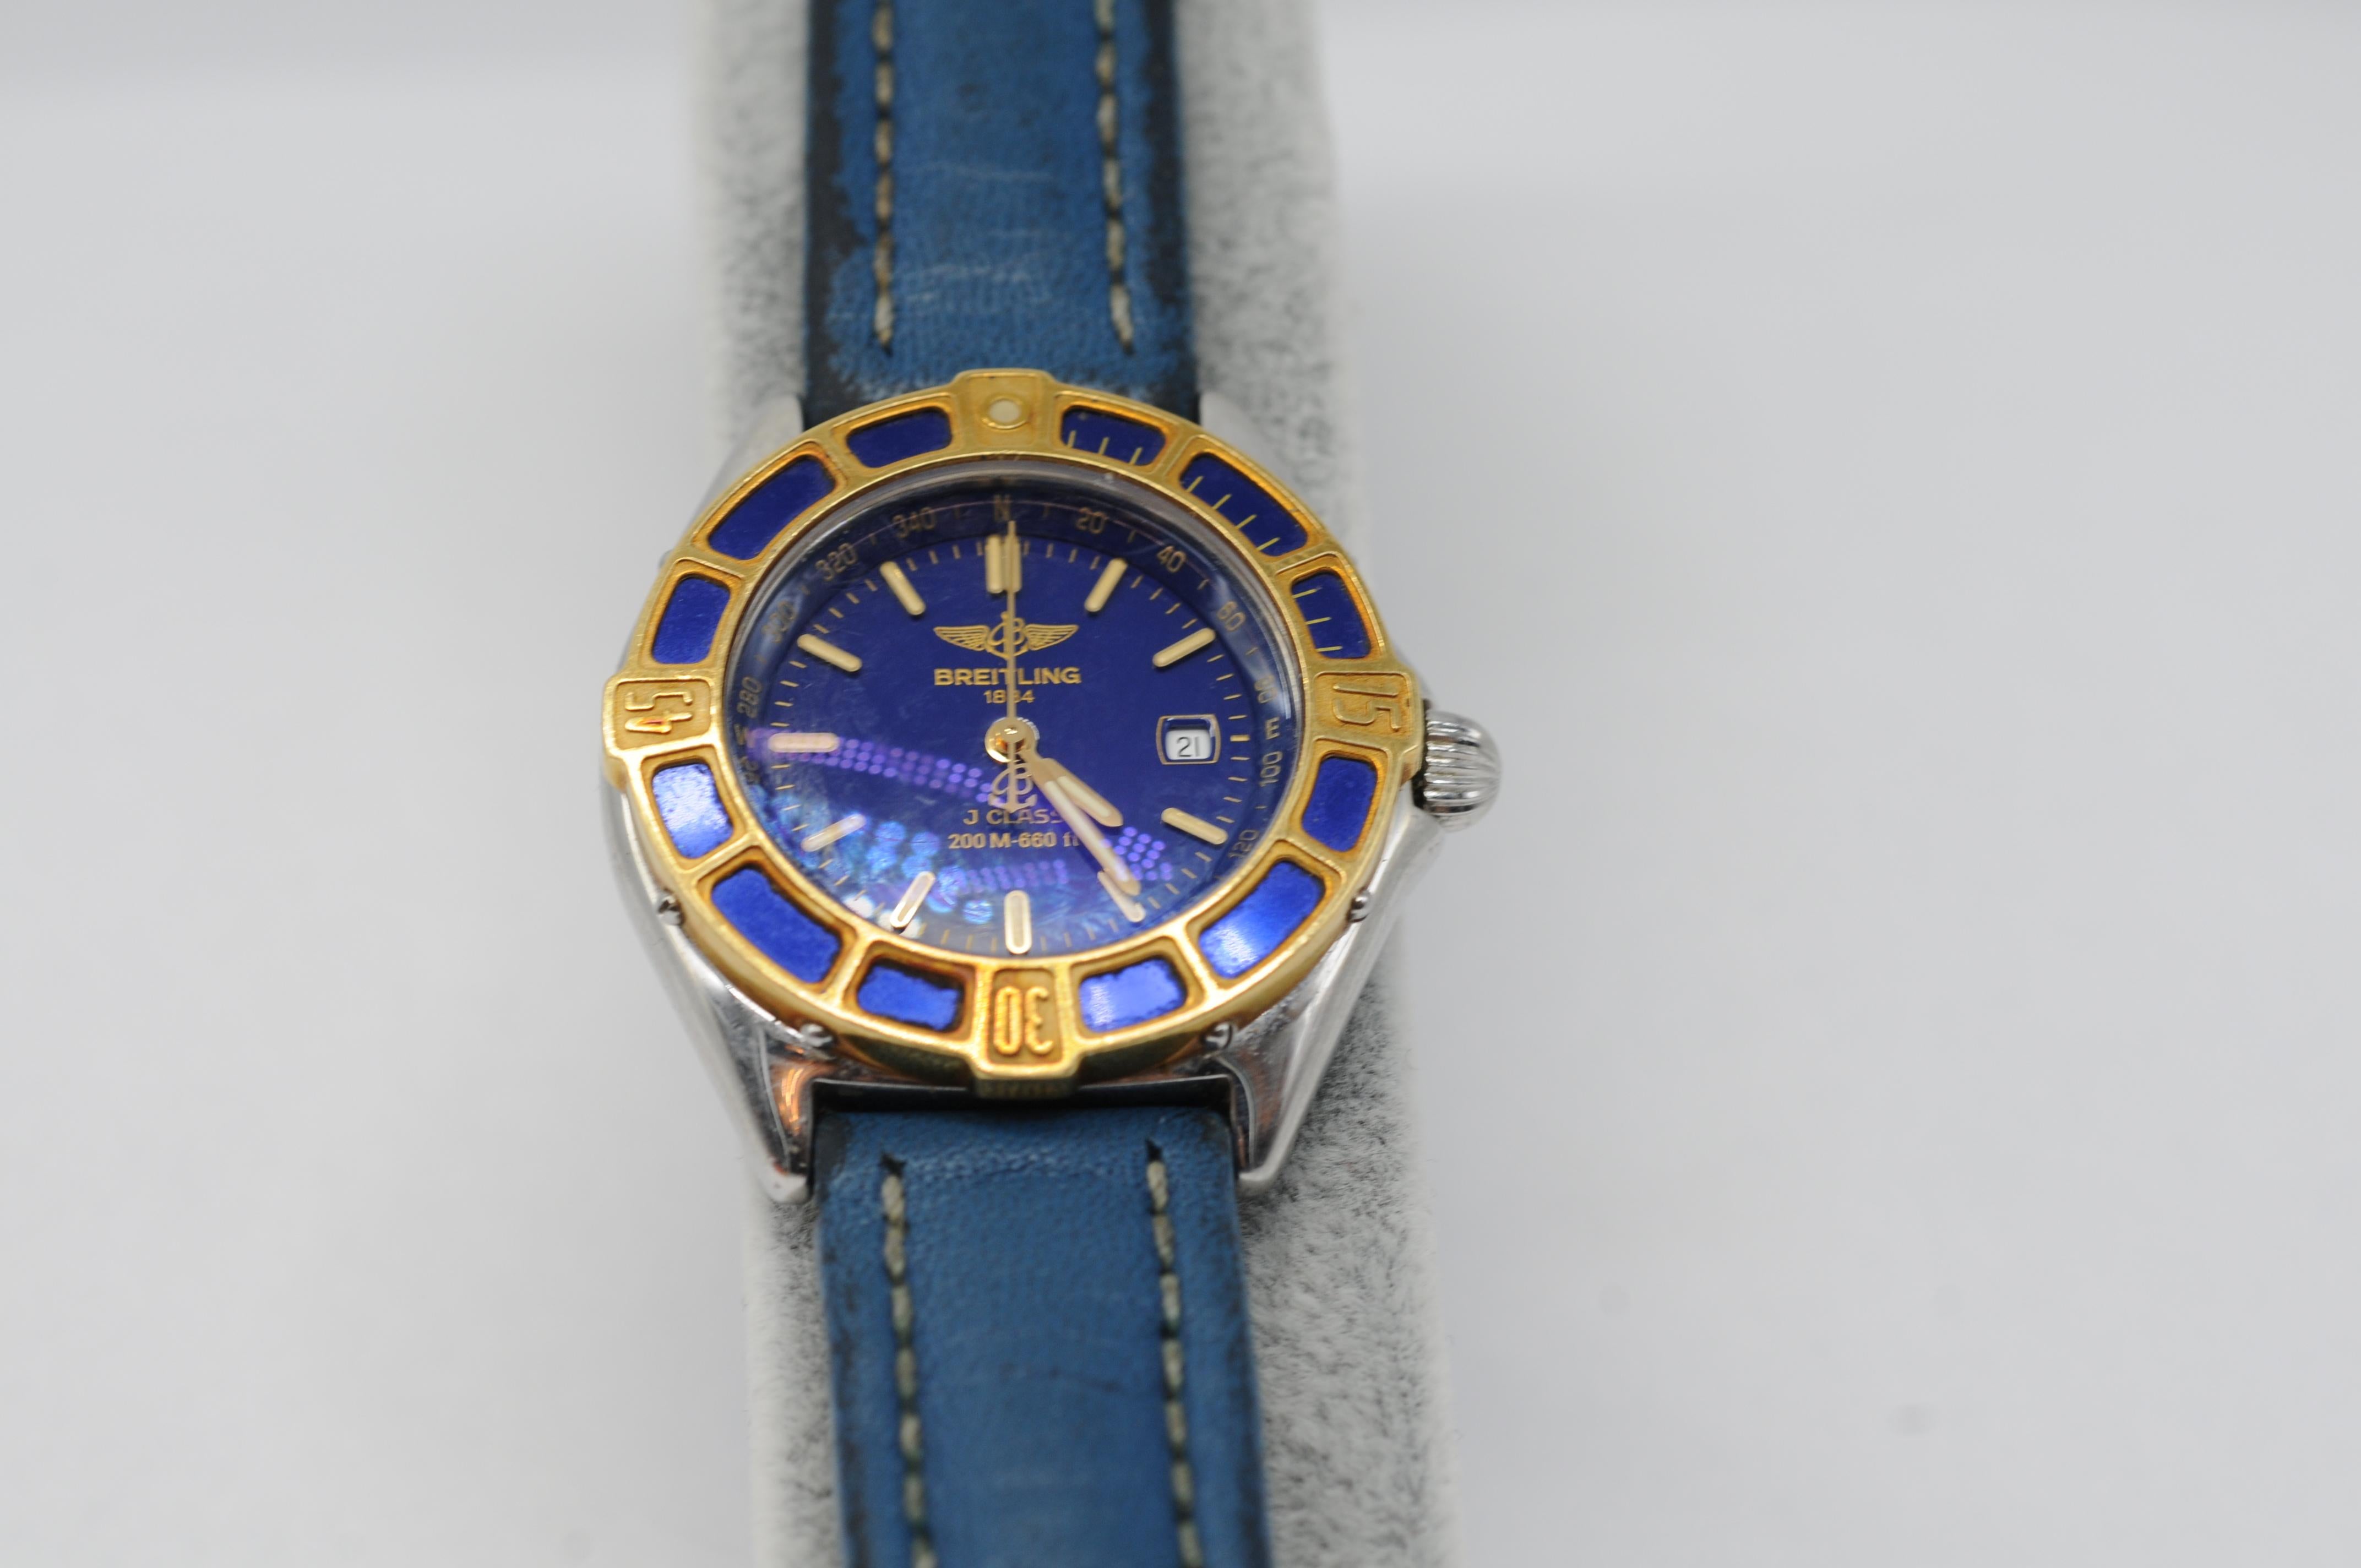 Breitling Lady J D52065 with a deep blue leather strap For Sale 3